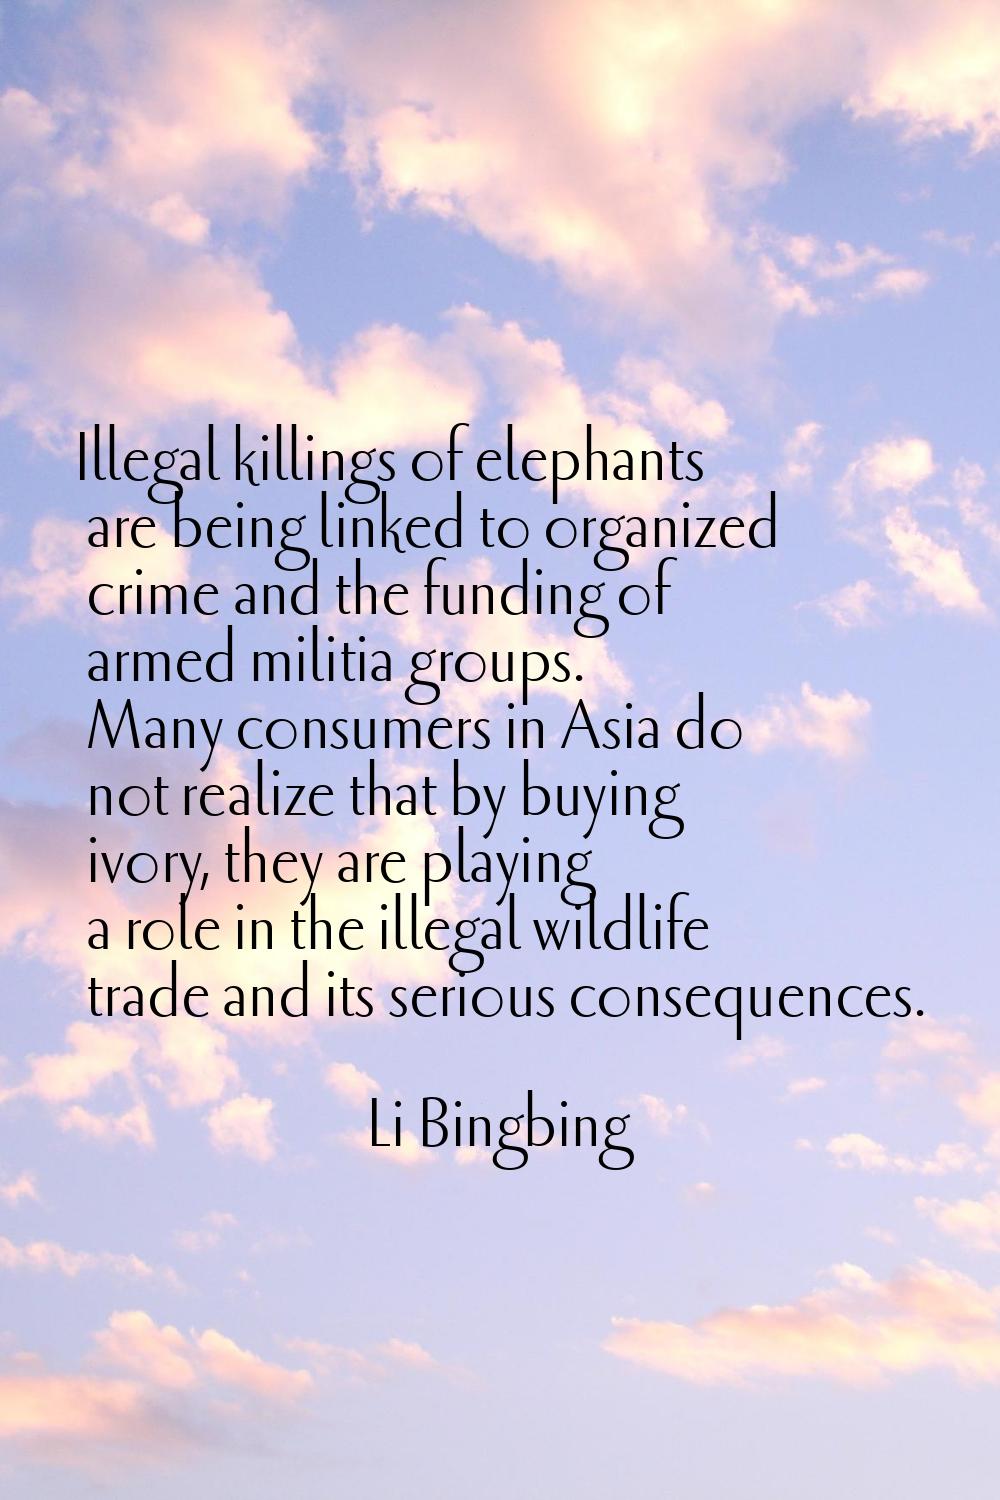 Illegal killings of elephants are being linked to organized crime and the funding of armed militia 